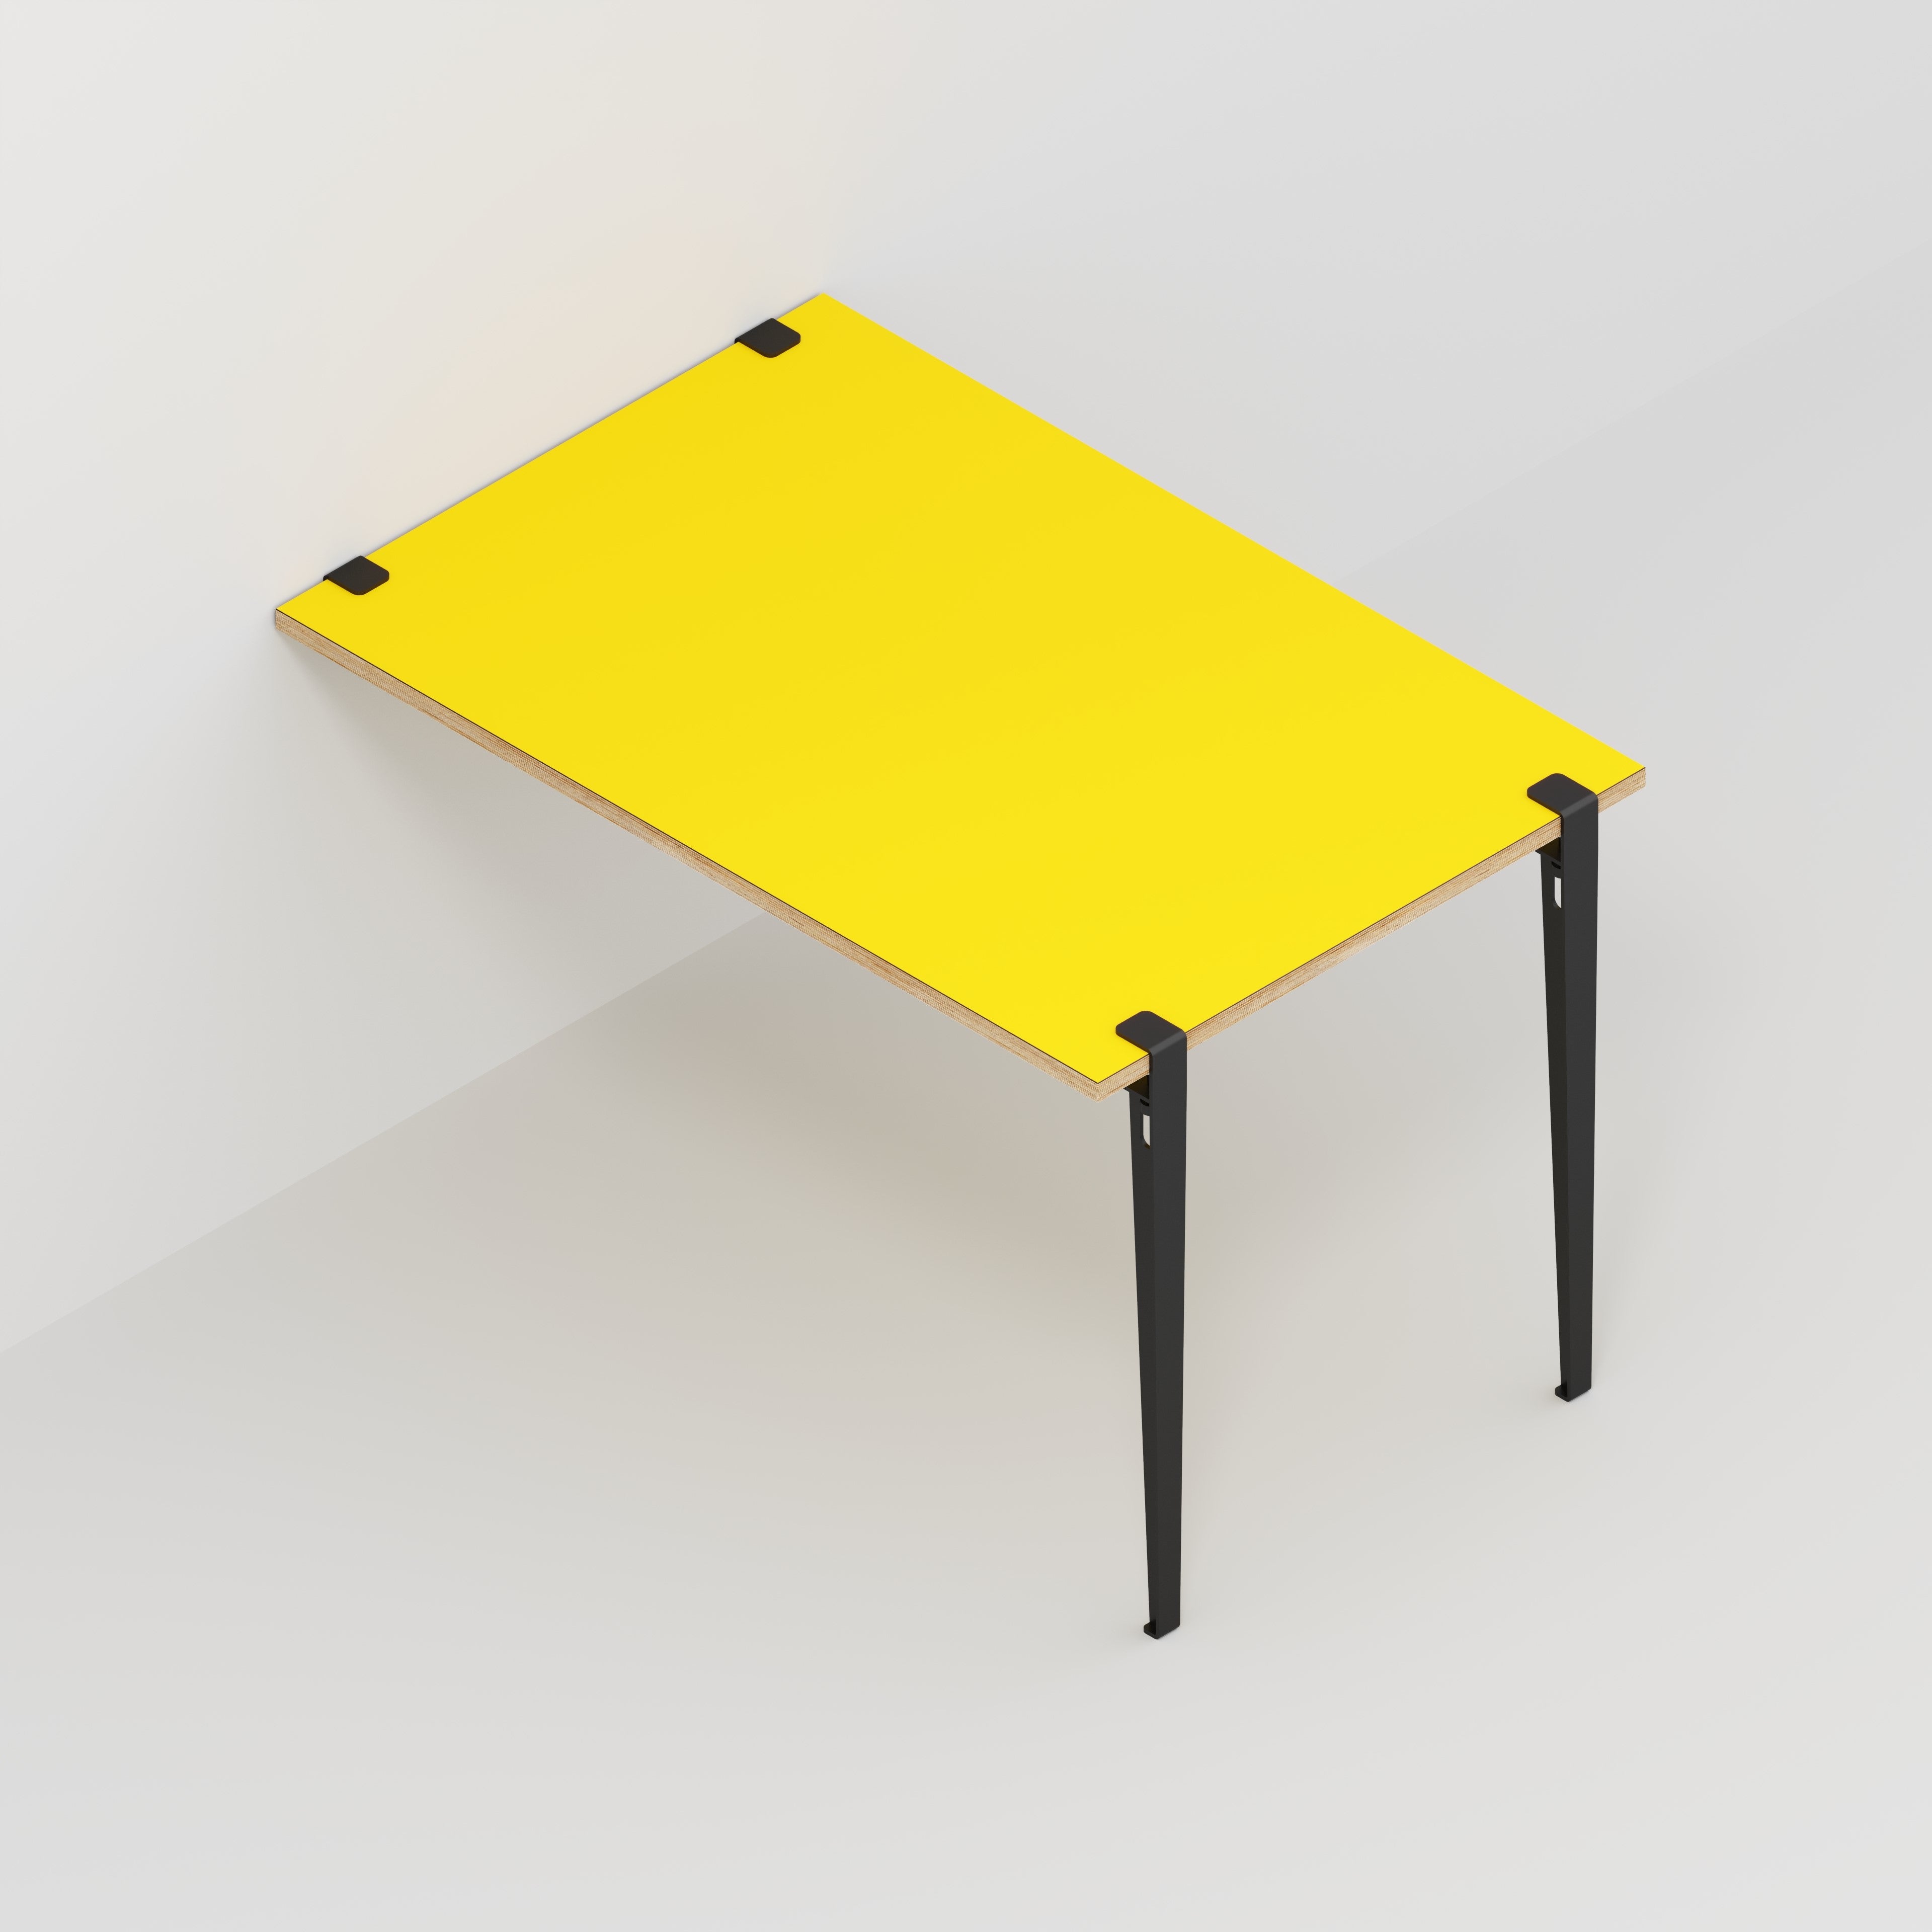 Wall Table with Black Tiptoe Legs and Brackets - Formica Chrome Yellow - 1200(w) x 800(d) x 750(h)